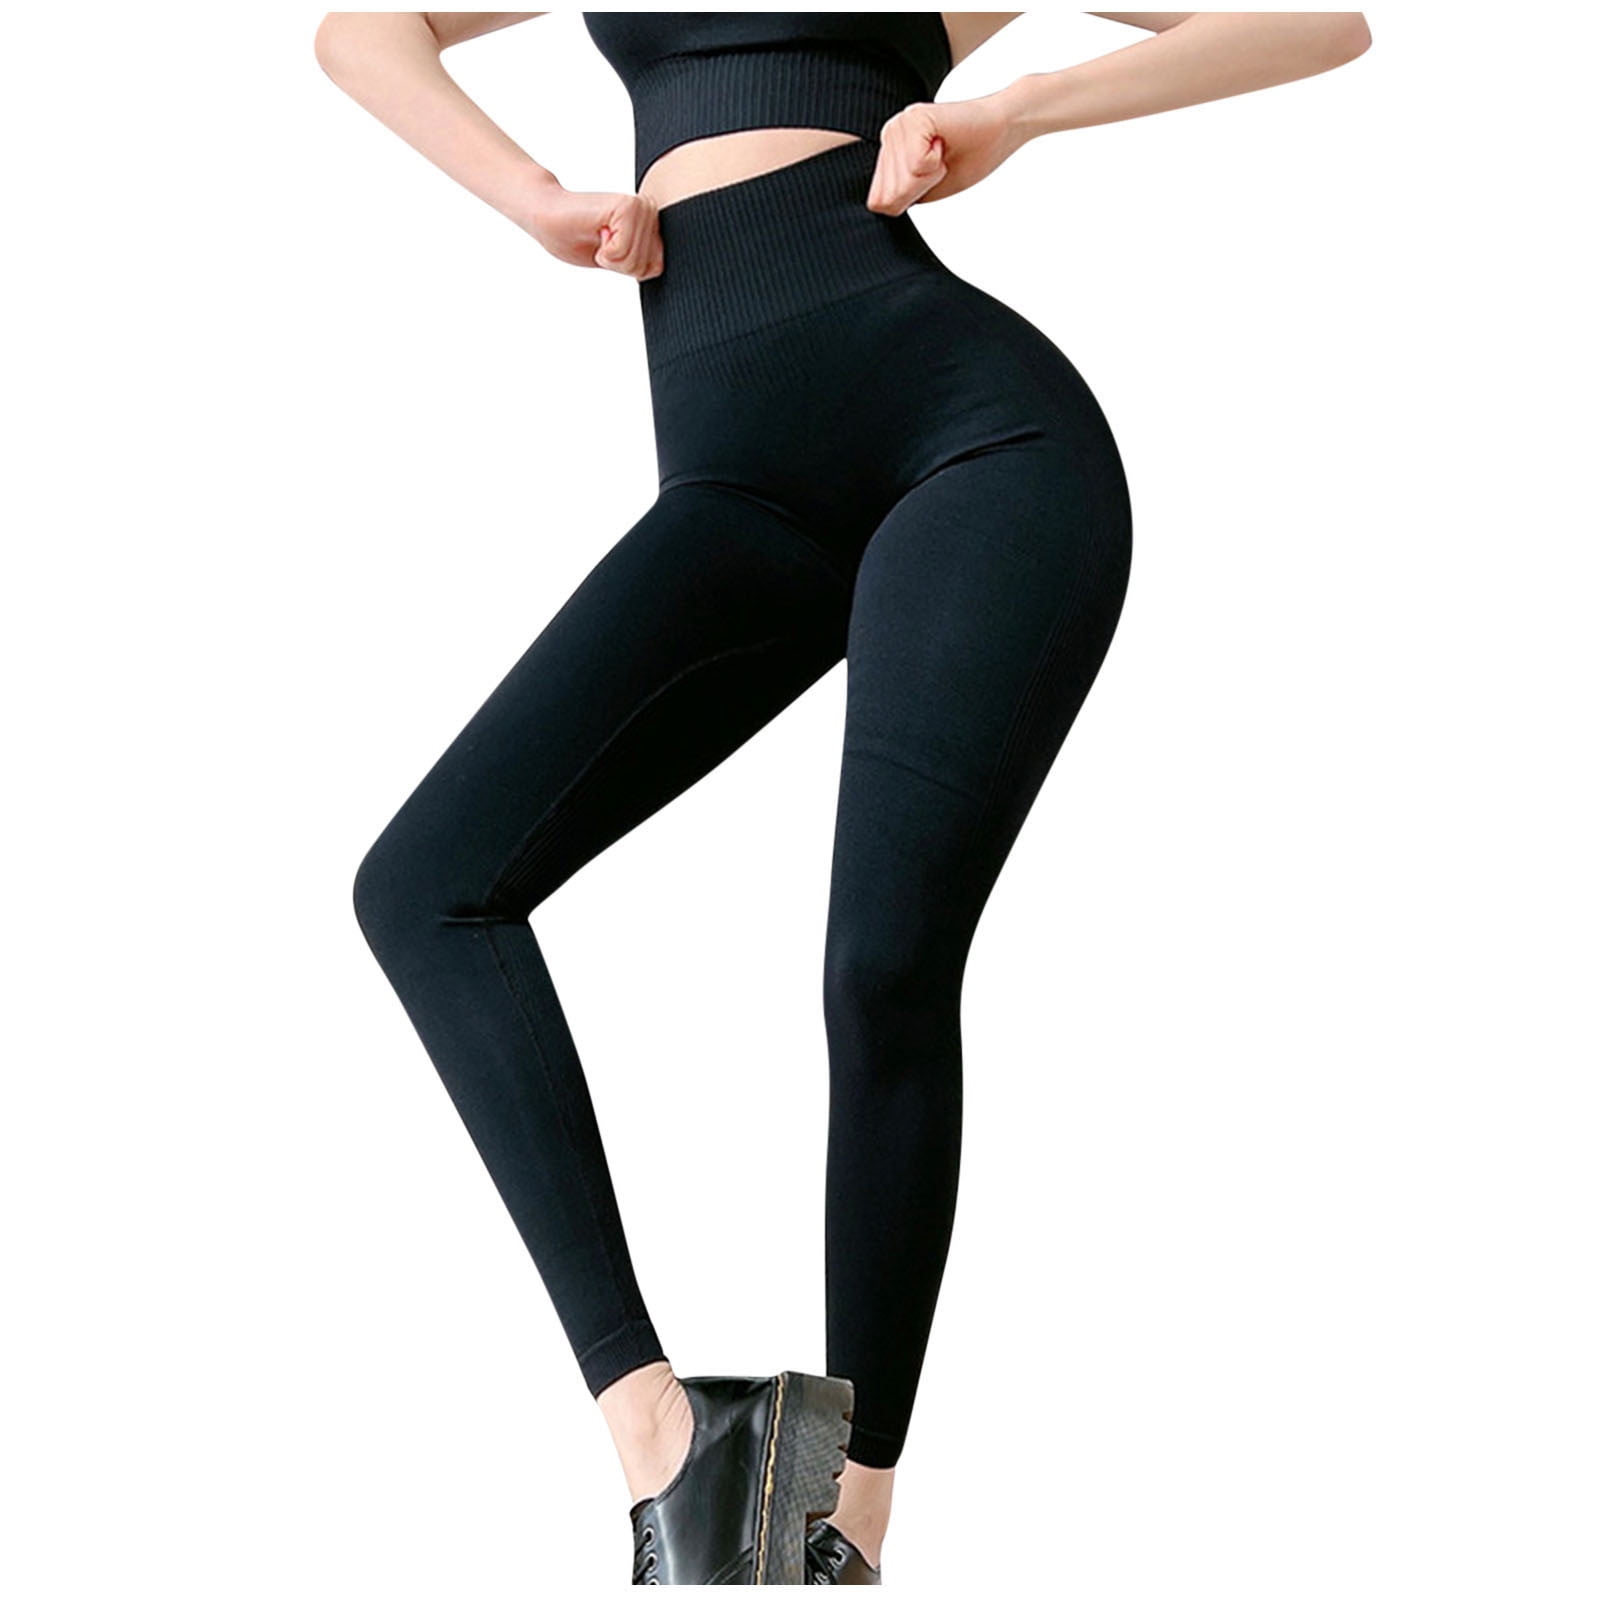 Jalioing Yoga Leggings for Women High Waist Solid Color Ribbed Side Leg  Stretchy Skinny Comfy Athletic Pants (Small, Black) 